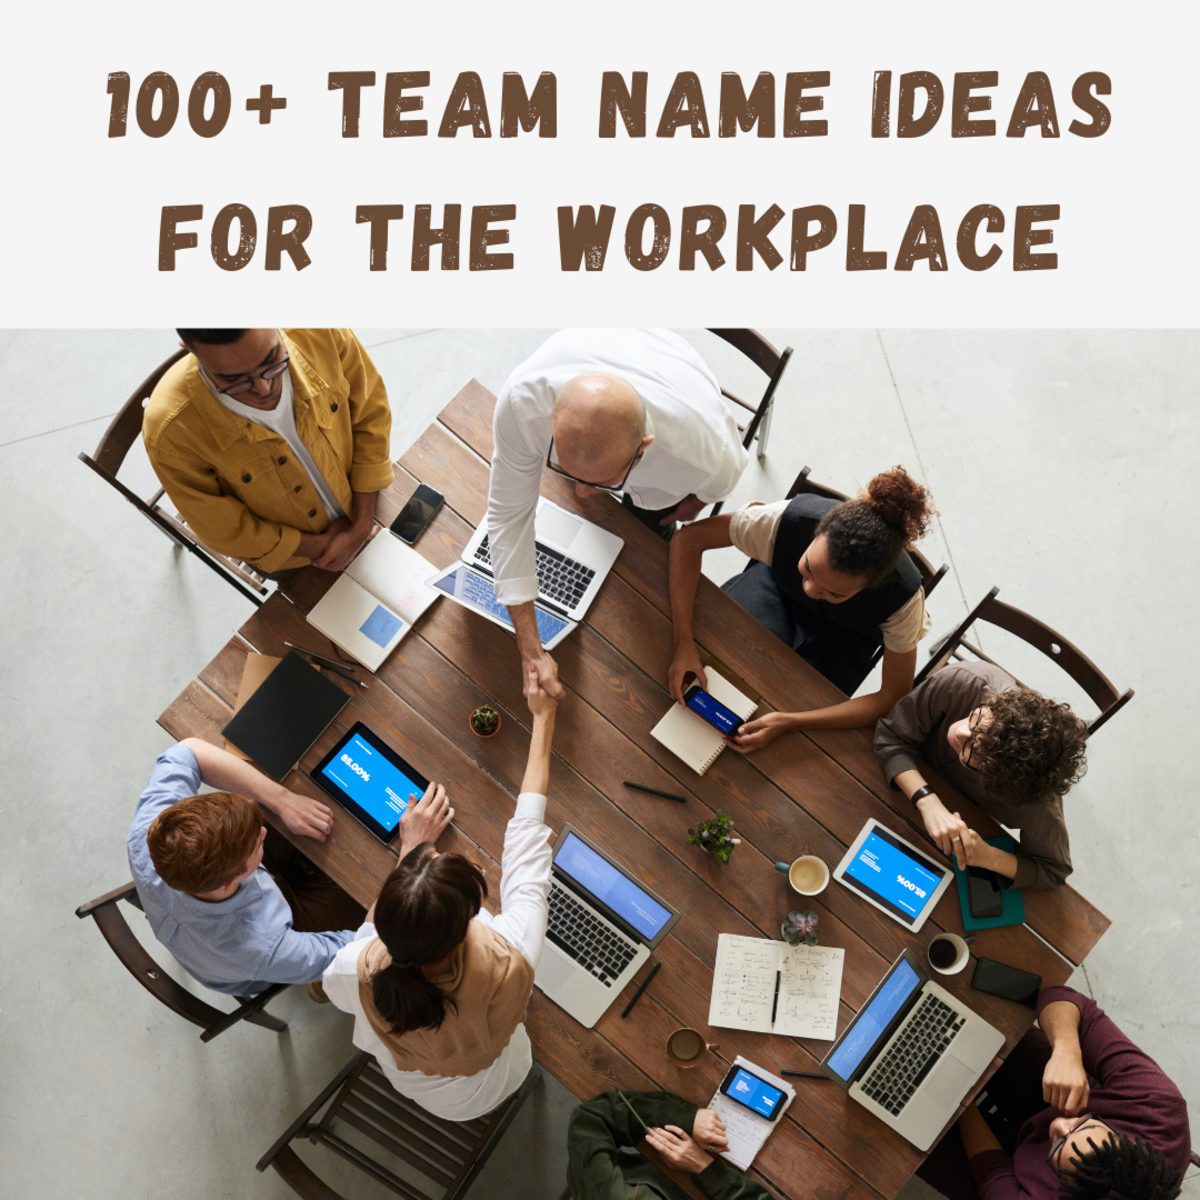 Use these work-friendly team names as inspiration for your next group project or team activity.